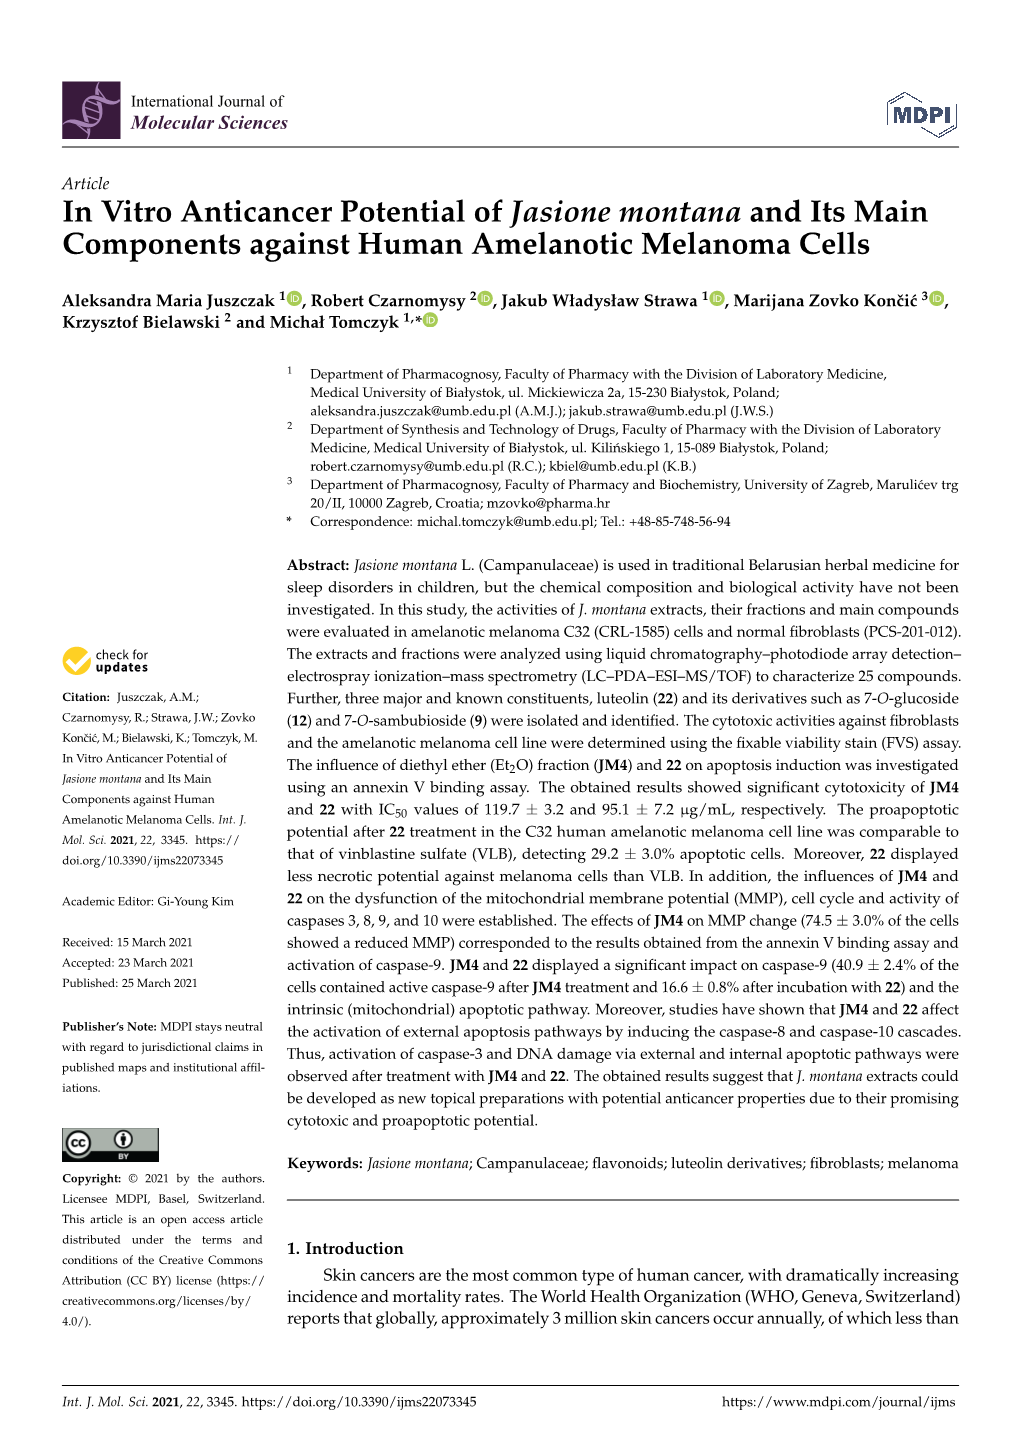 In Vitro Anticancer Potential of Jasione Montana and Its Main Components Against Human Amelanotic Melanoma Cells